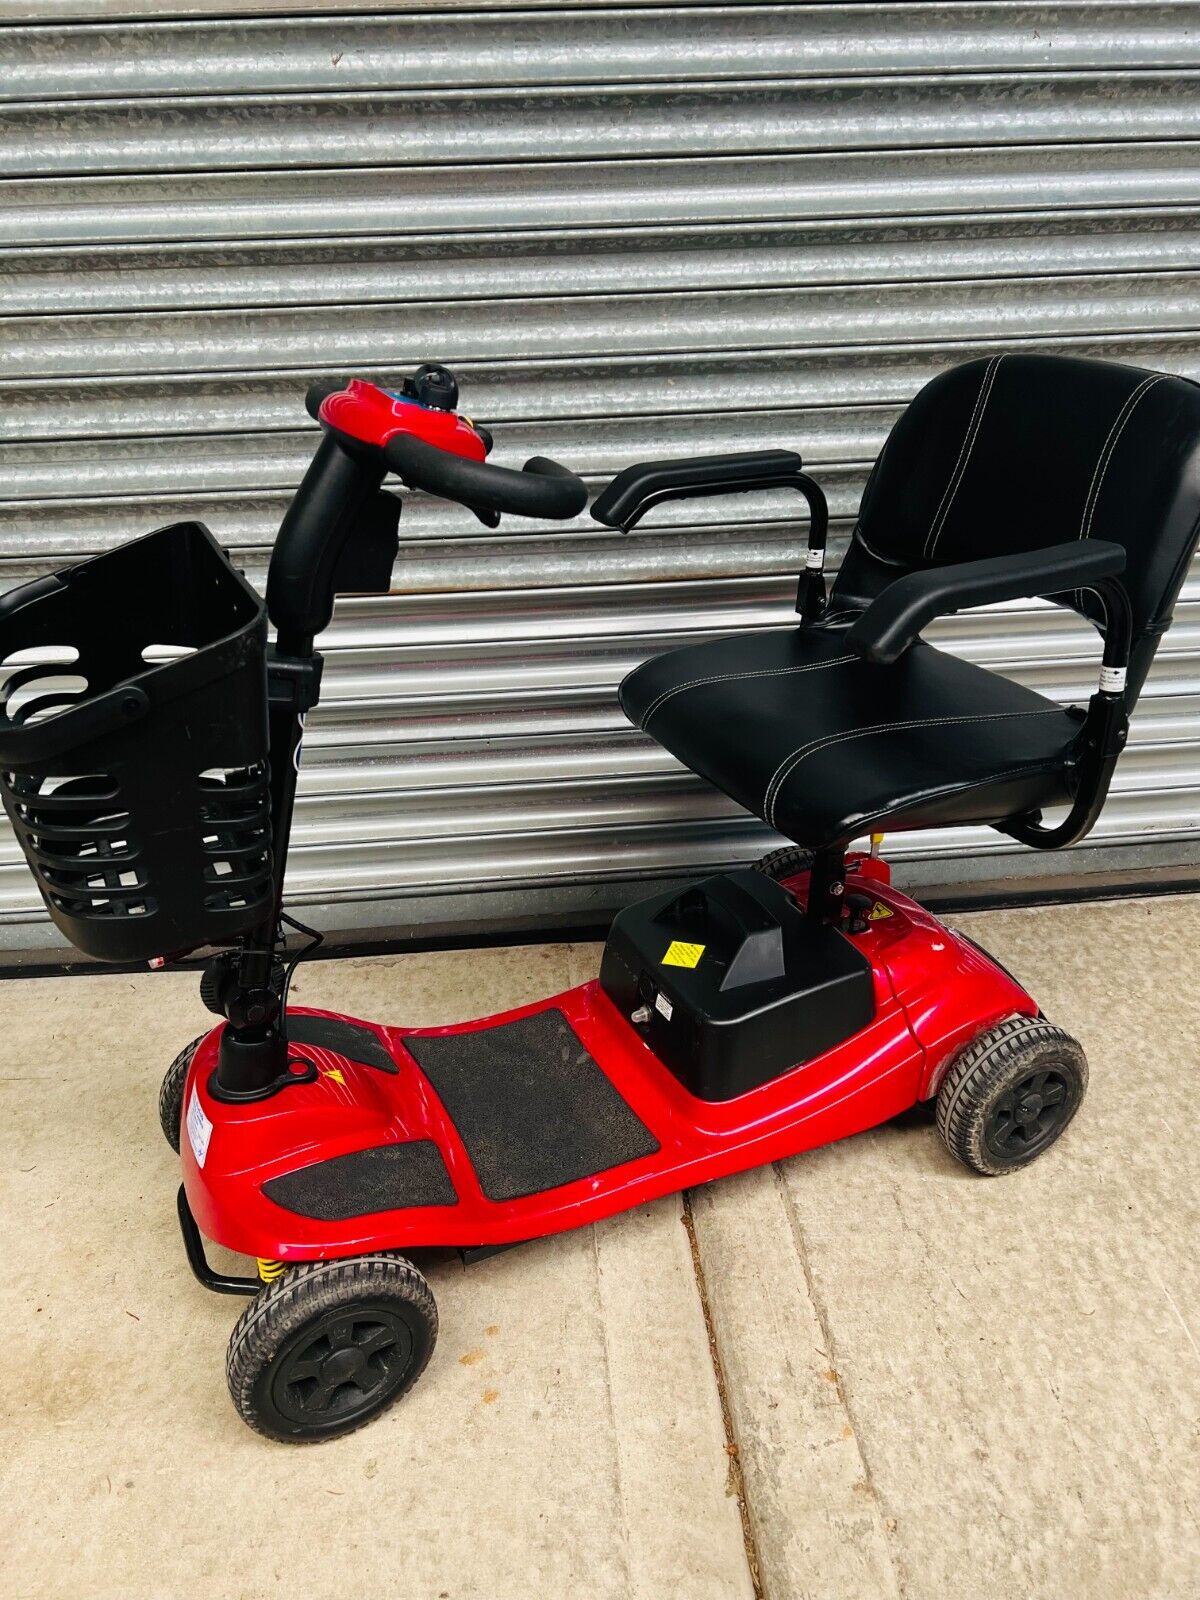 LIBERTY VOGUE PORTABLE CAR BOOT SMALL SIZE MOBILITY SCOOTER BUGGY